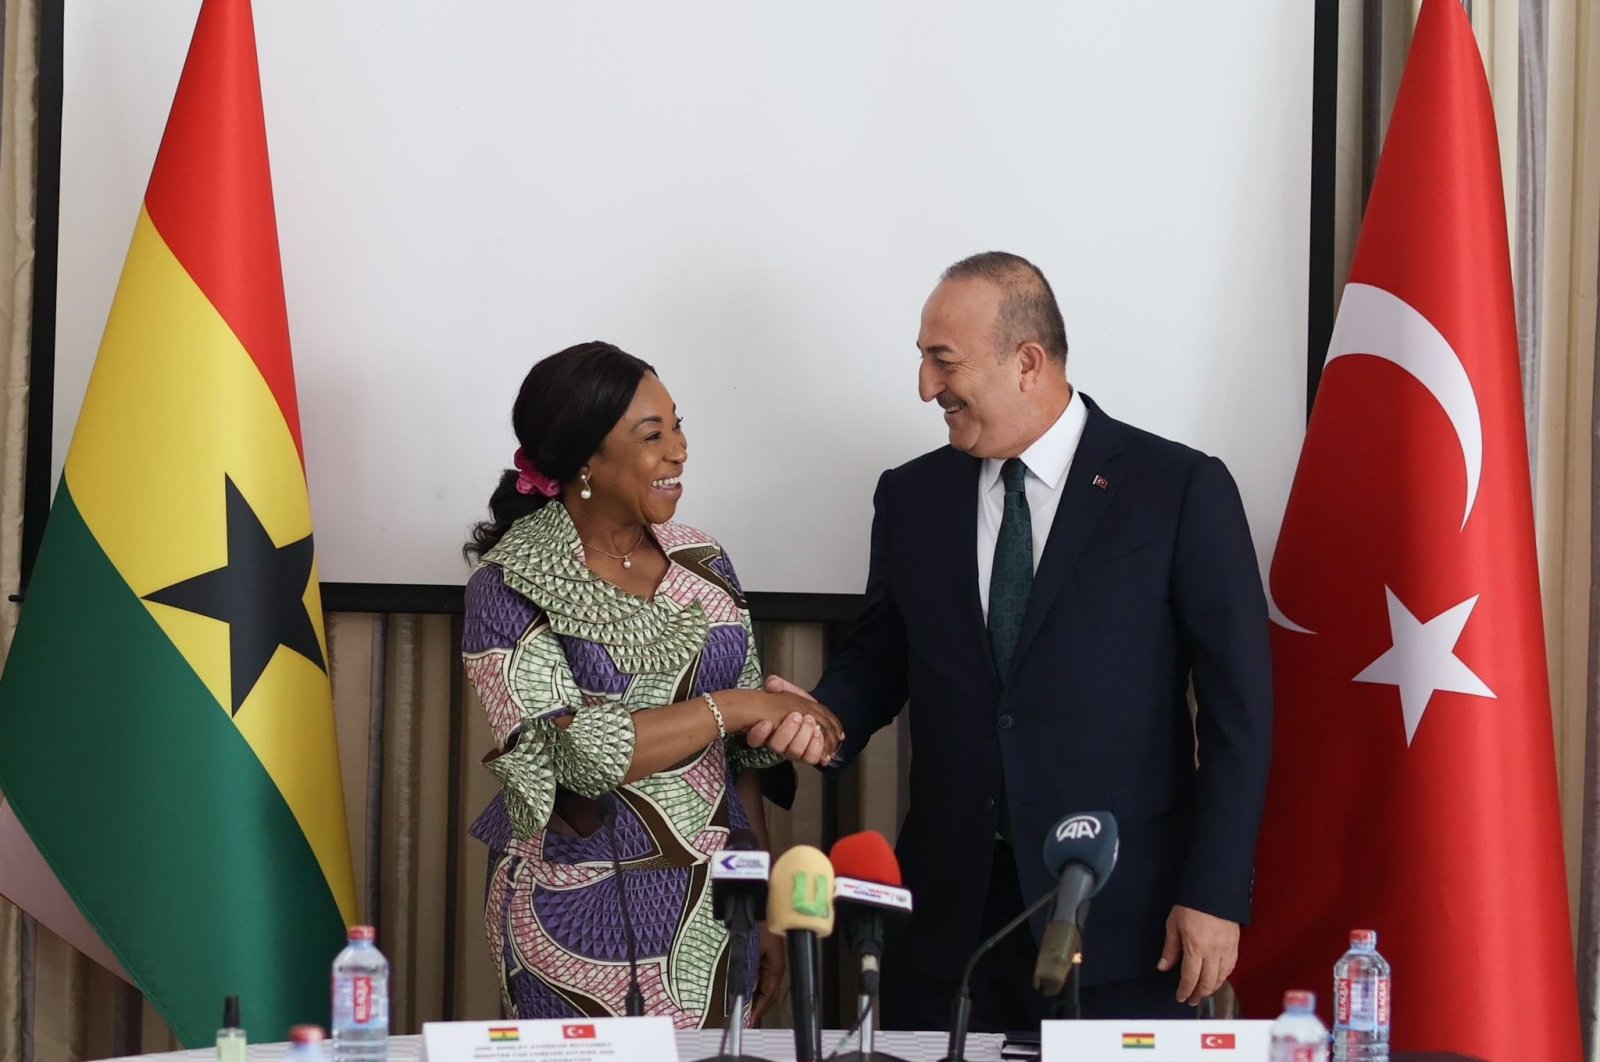 Turkish Foreign Minister Mevlüt Çavuşoğlu (R) attends a joint conference with his Ghanaian counterpart Shirley Botchwey in Accra, Ghana, Oct. 26, 2022. (IHA Photo)